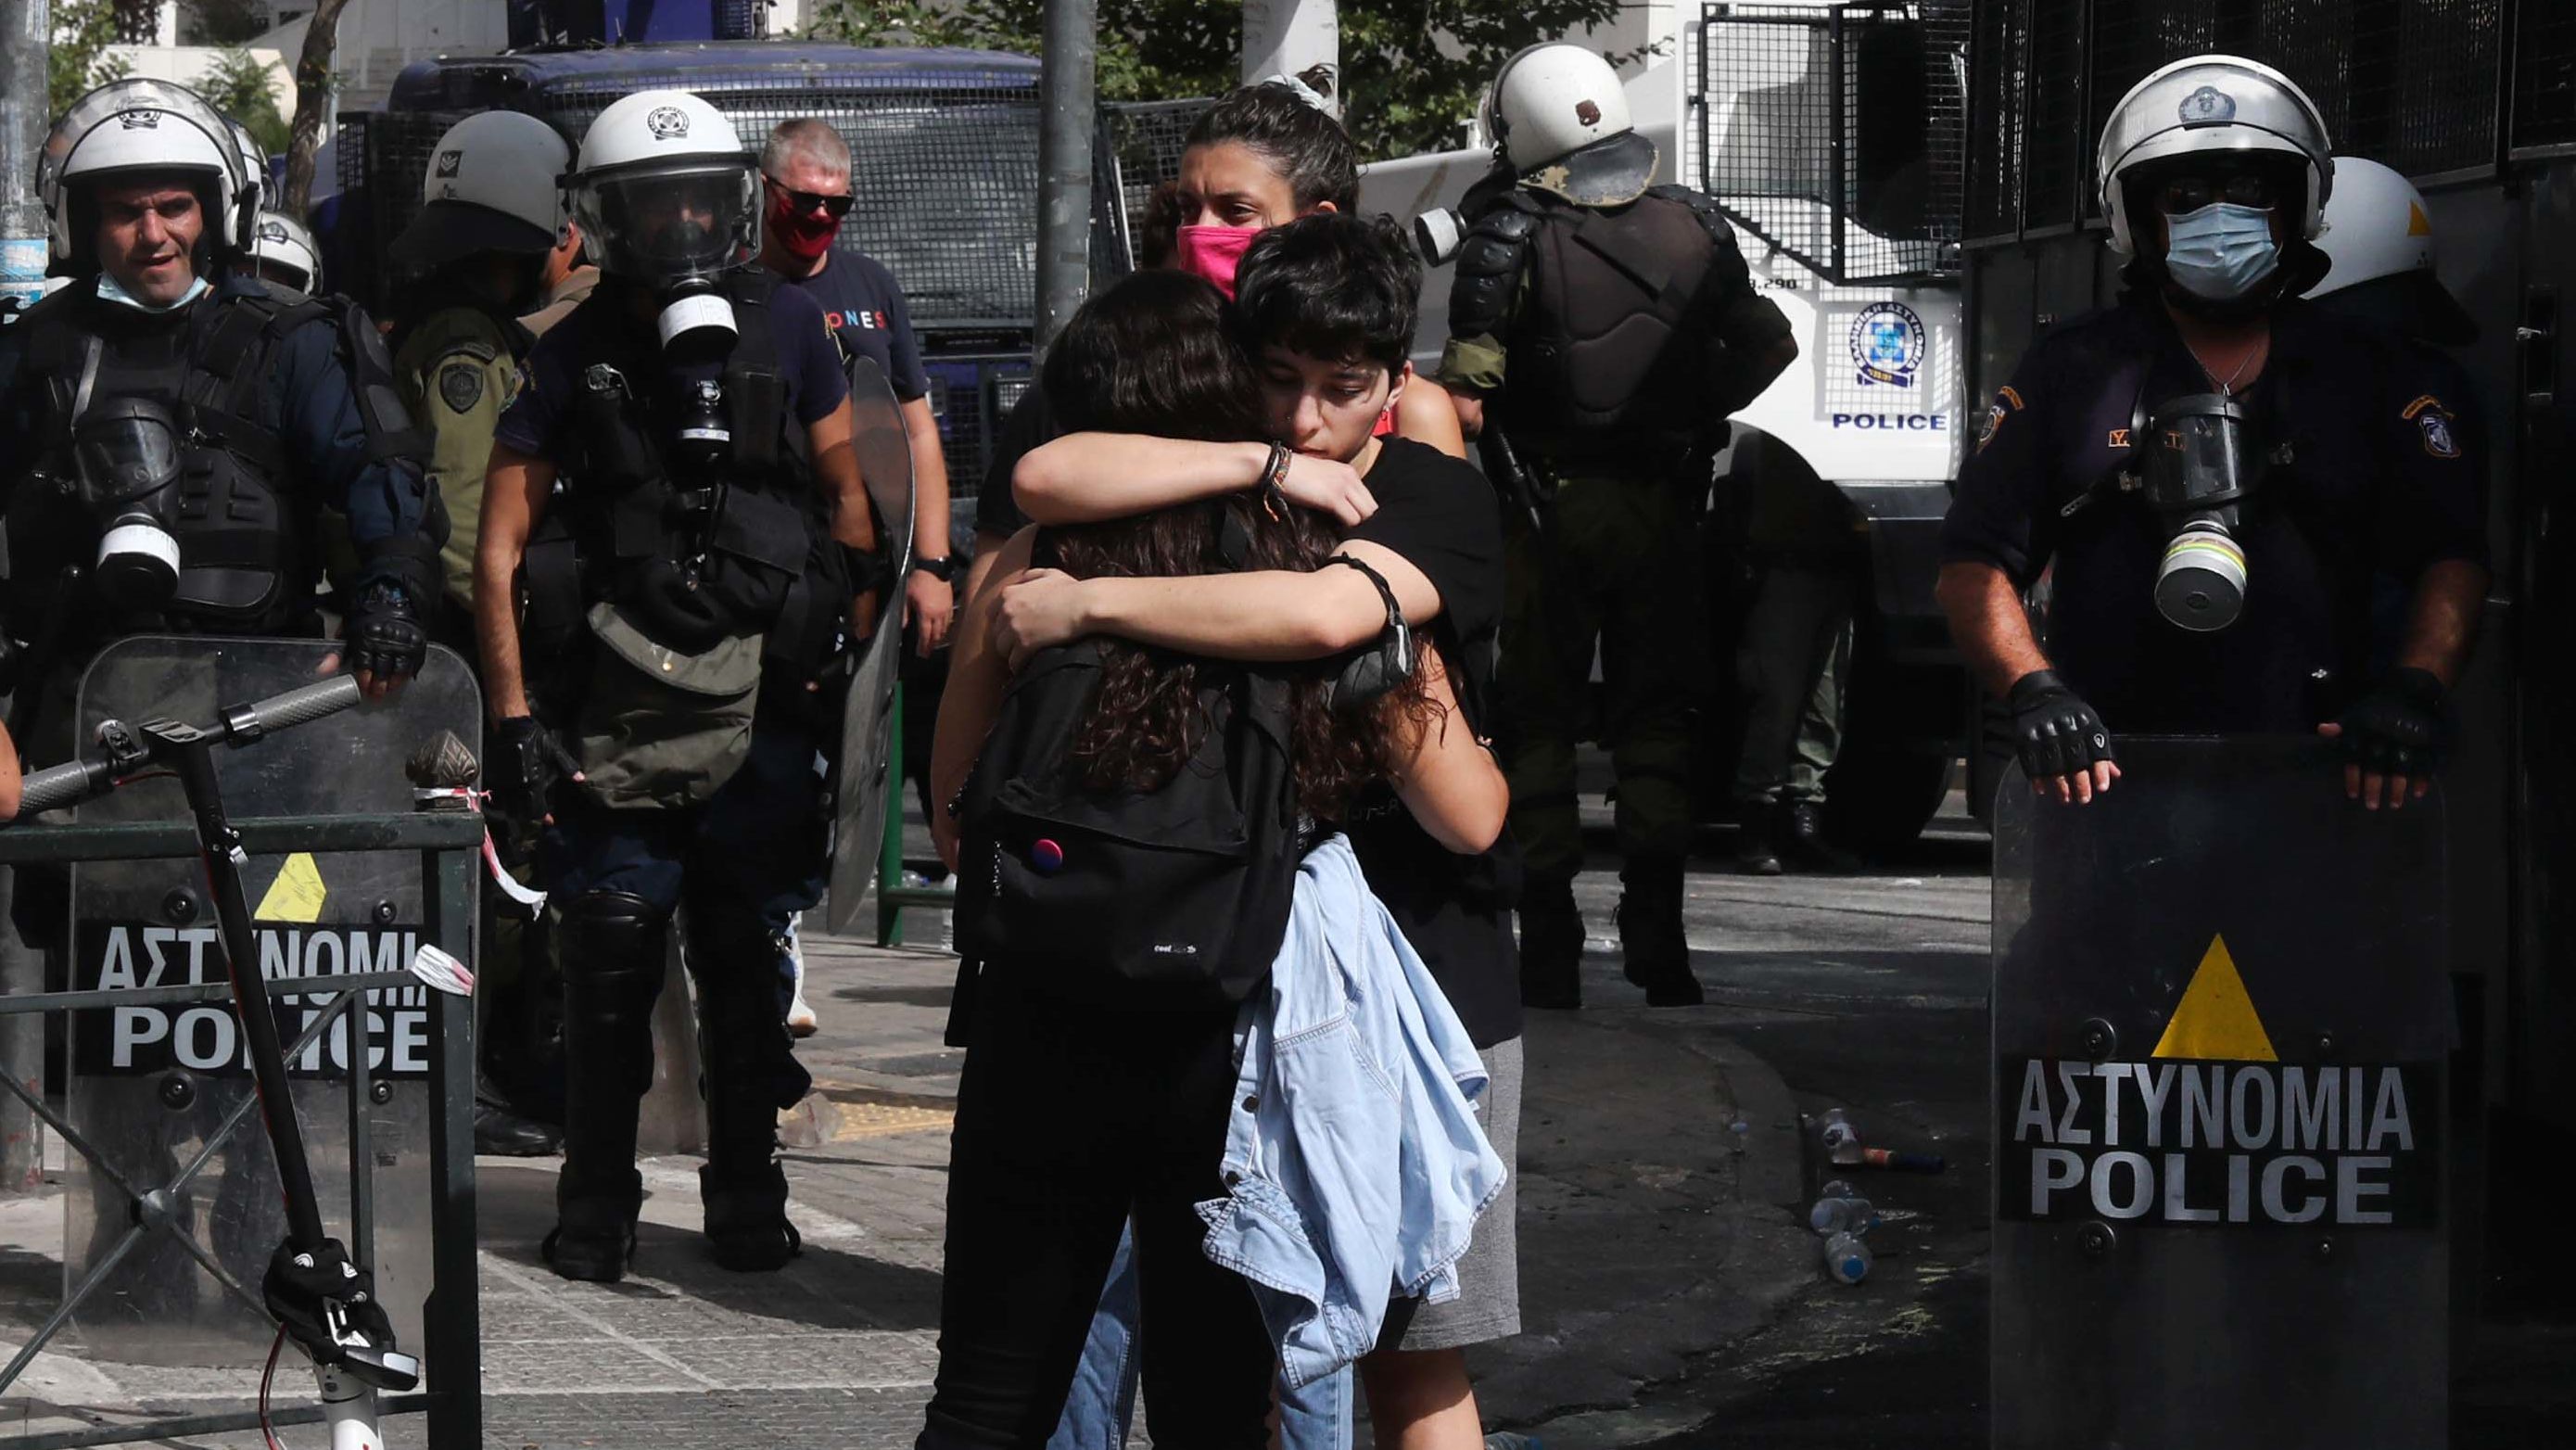 Protesters at the anti-fascist rally, embrace each other following the announcement of the verdict, outside the courthouse in Athens on Wednesday.